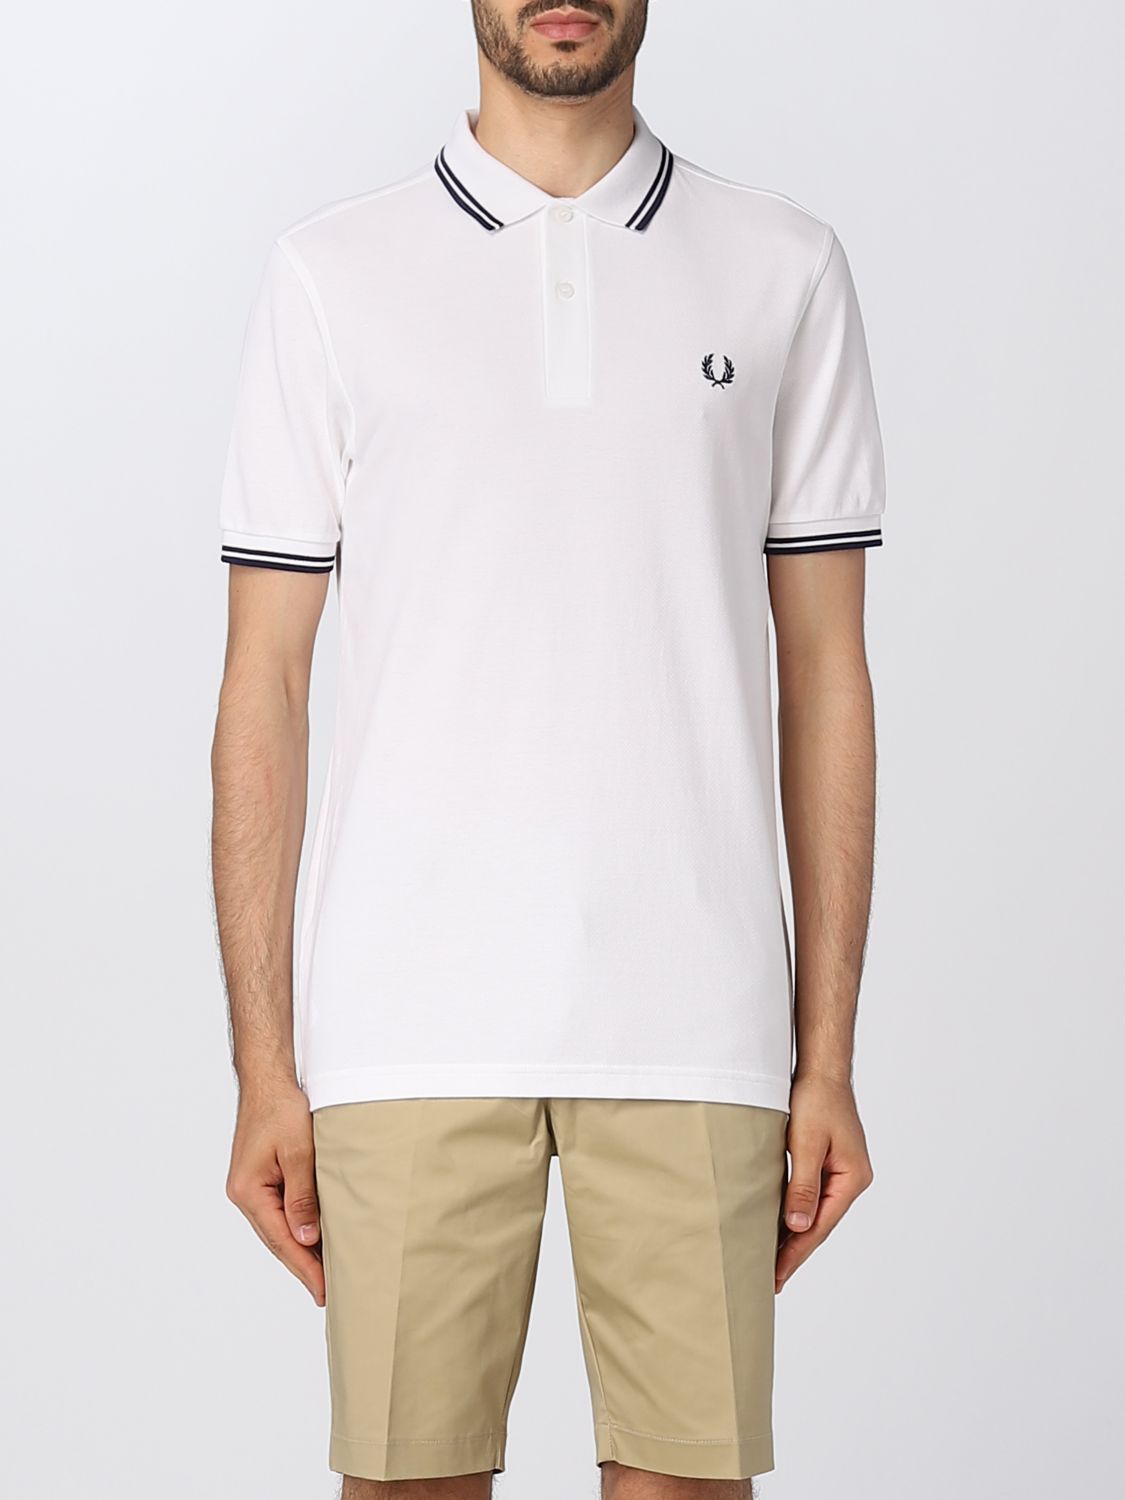 Fred Perry Outlet: polo shirt for man - Yellow Cream | Fred Perry polo ...